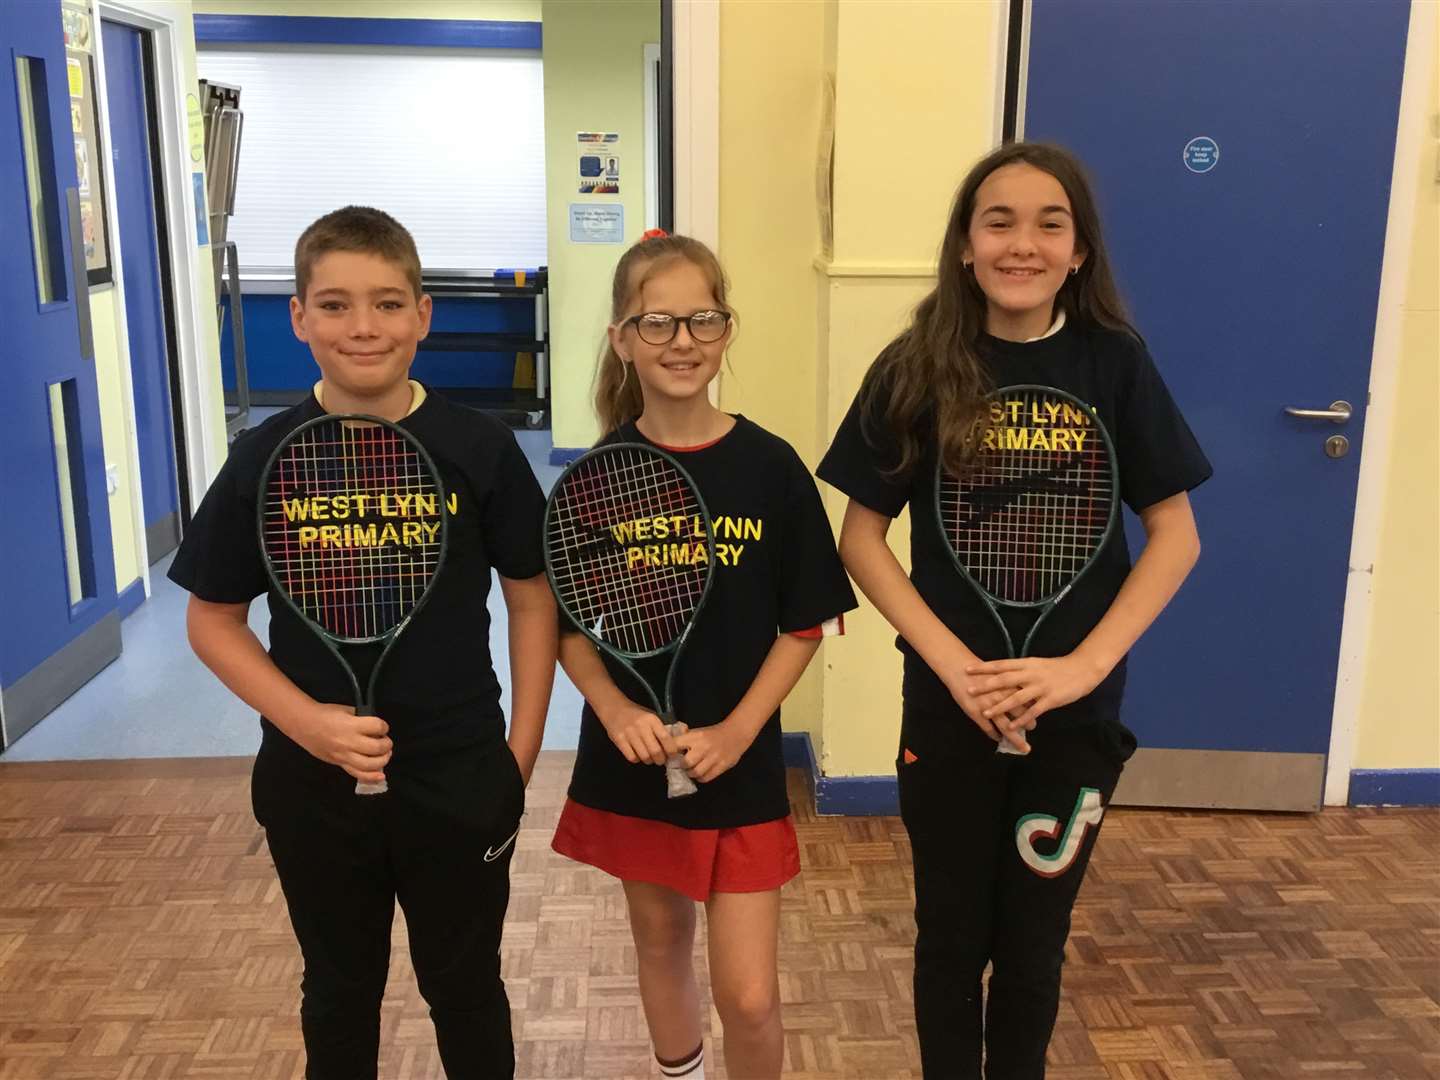 Students from West Lynn Primary took part in a Develop SSP (School Sports Partnership) Mini Tennis Festival, held at Lynnsport.